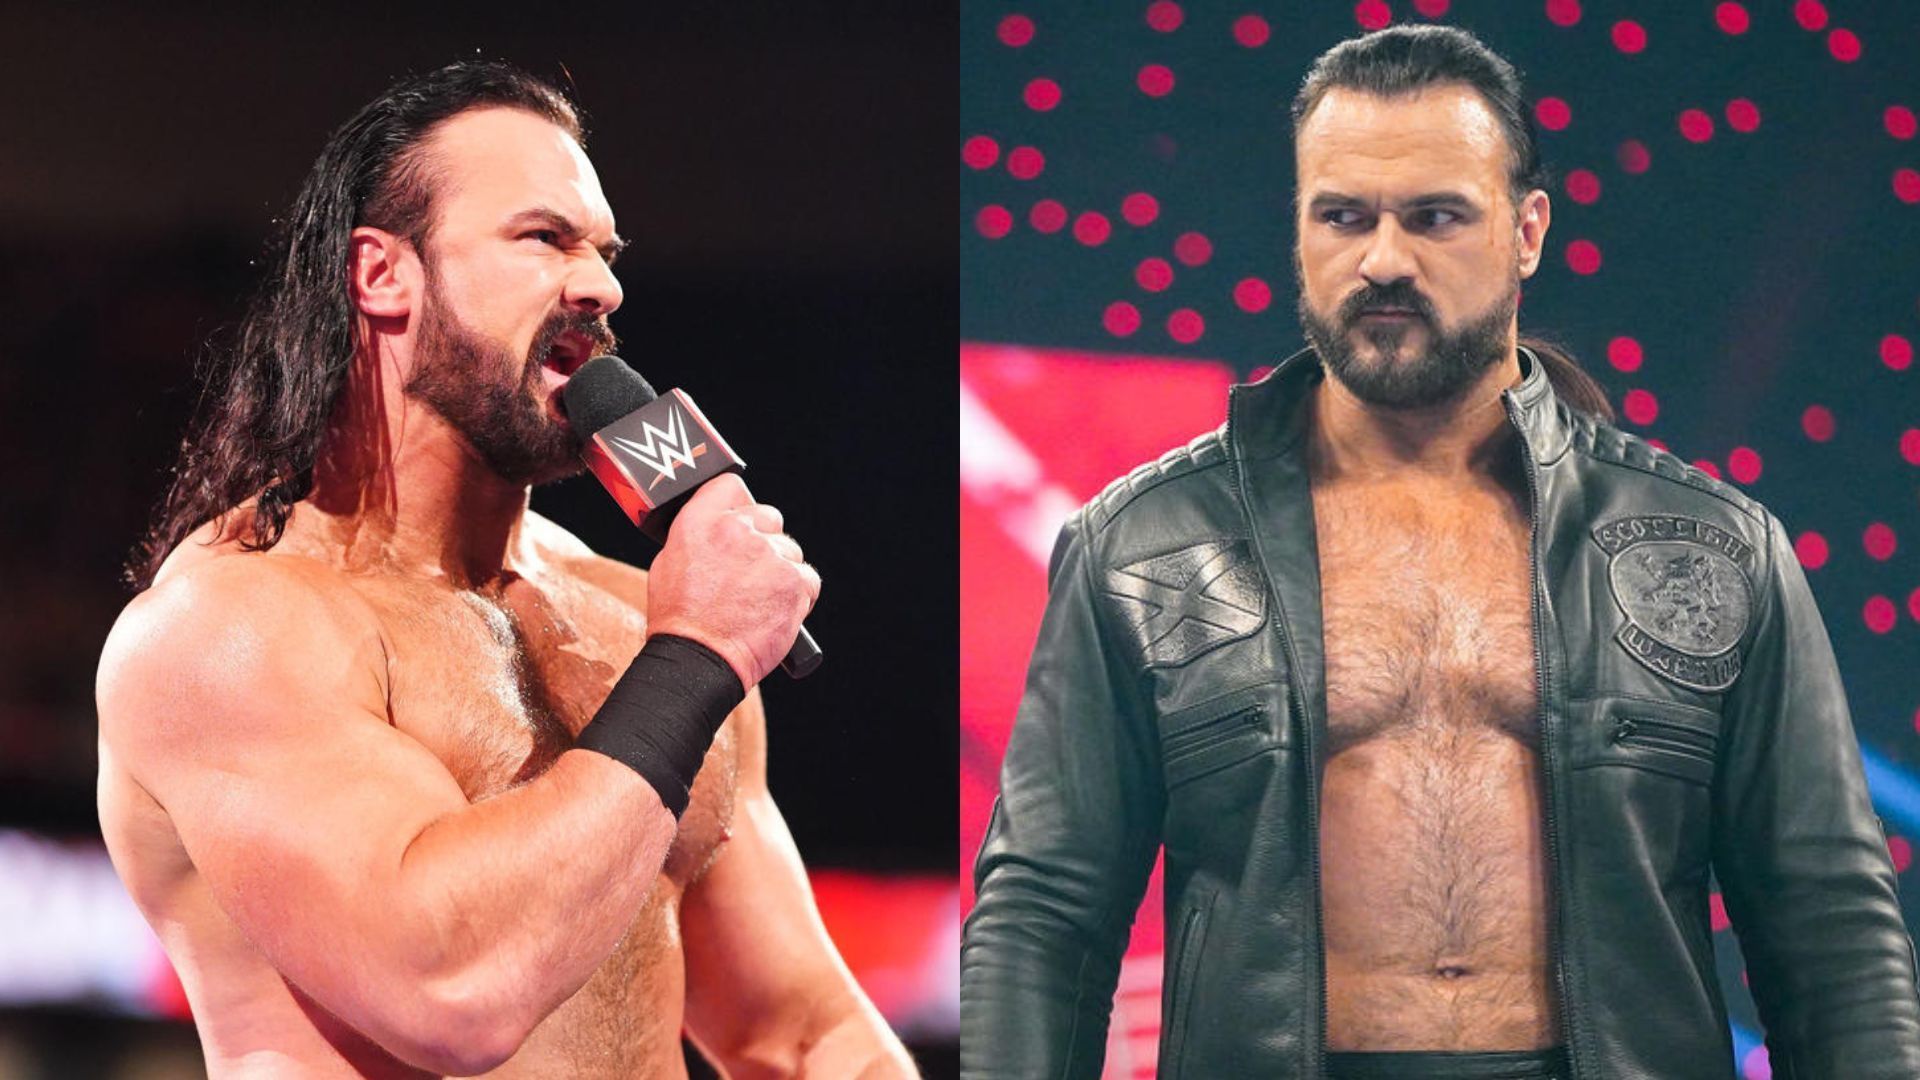 McIntyre is currently on the RAW roster.